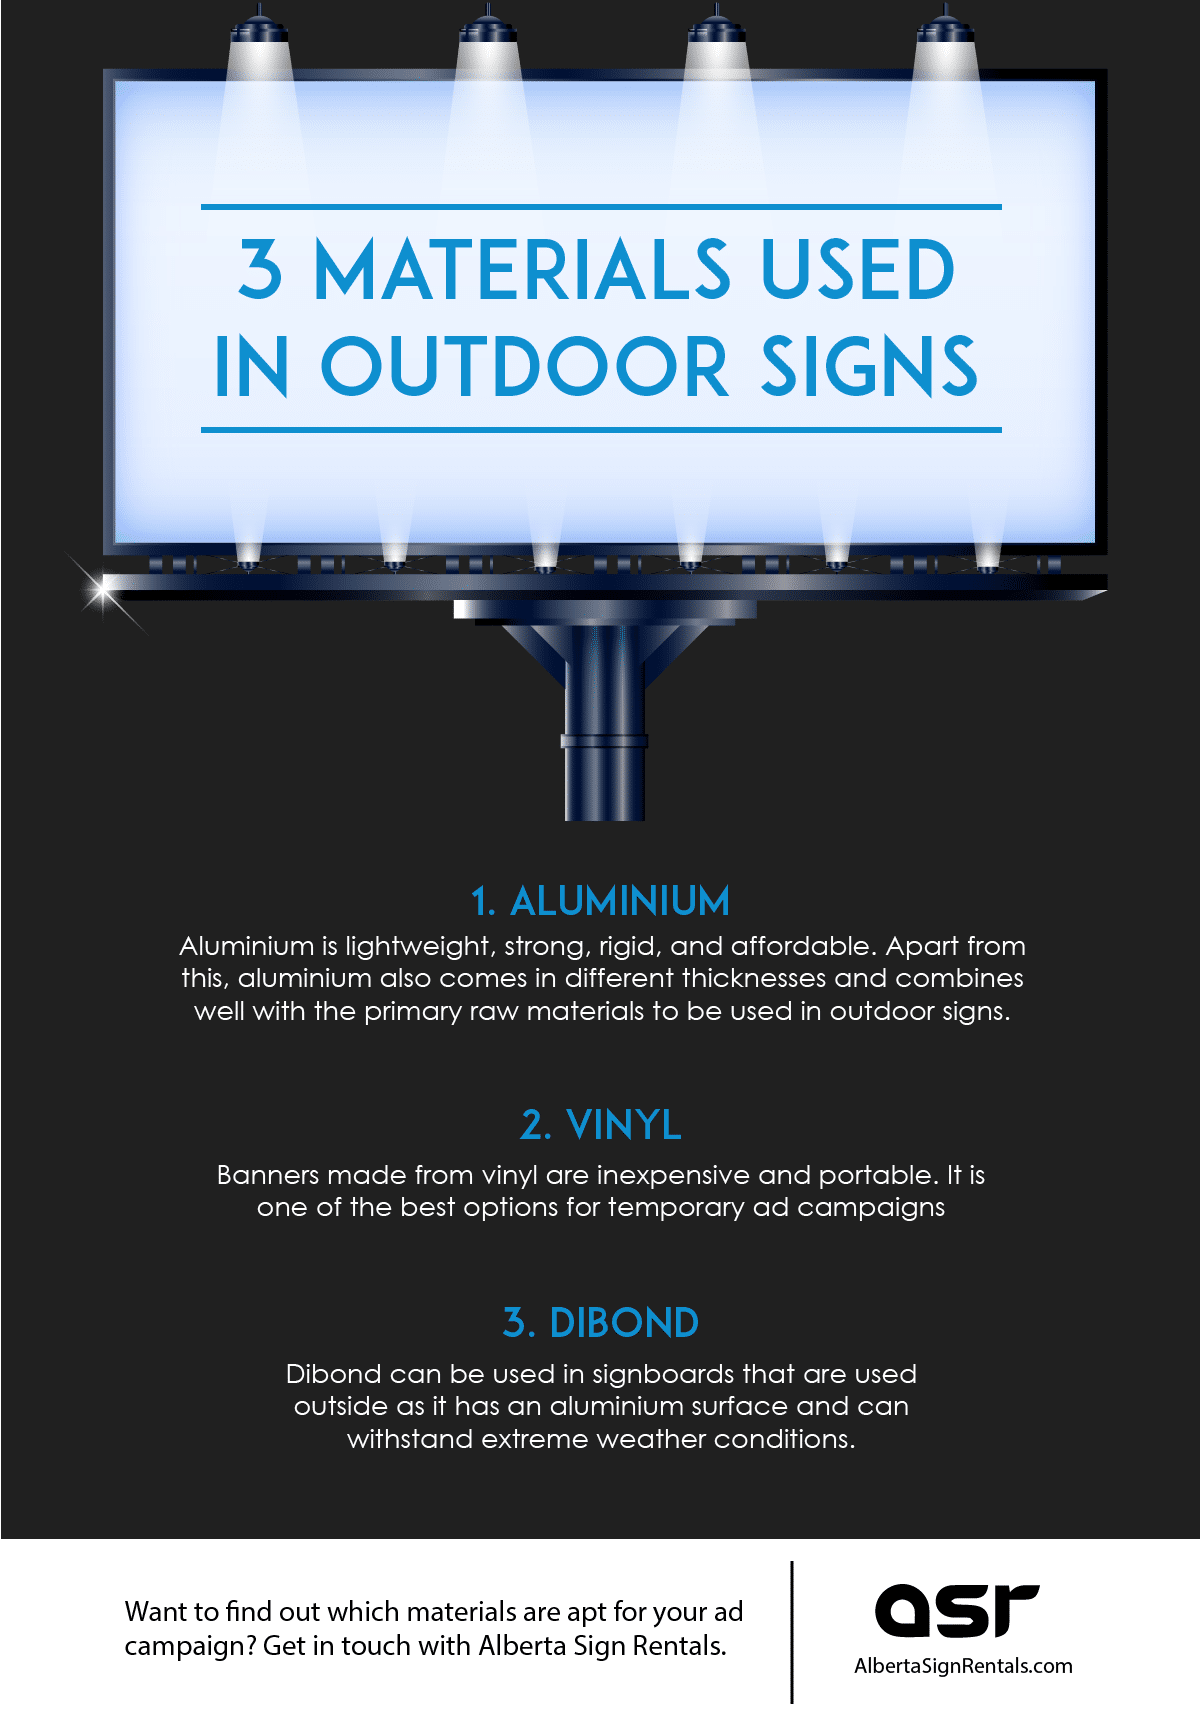 Materials Used in Outdoor Signs